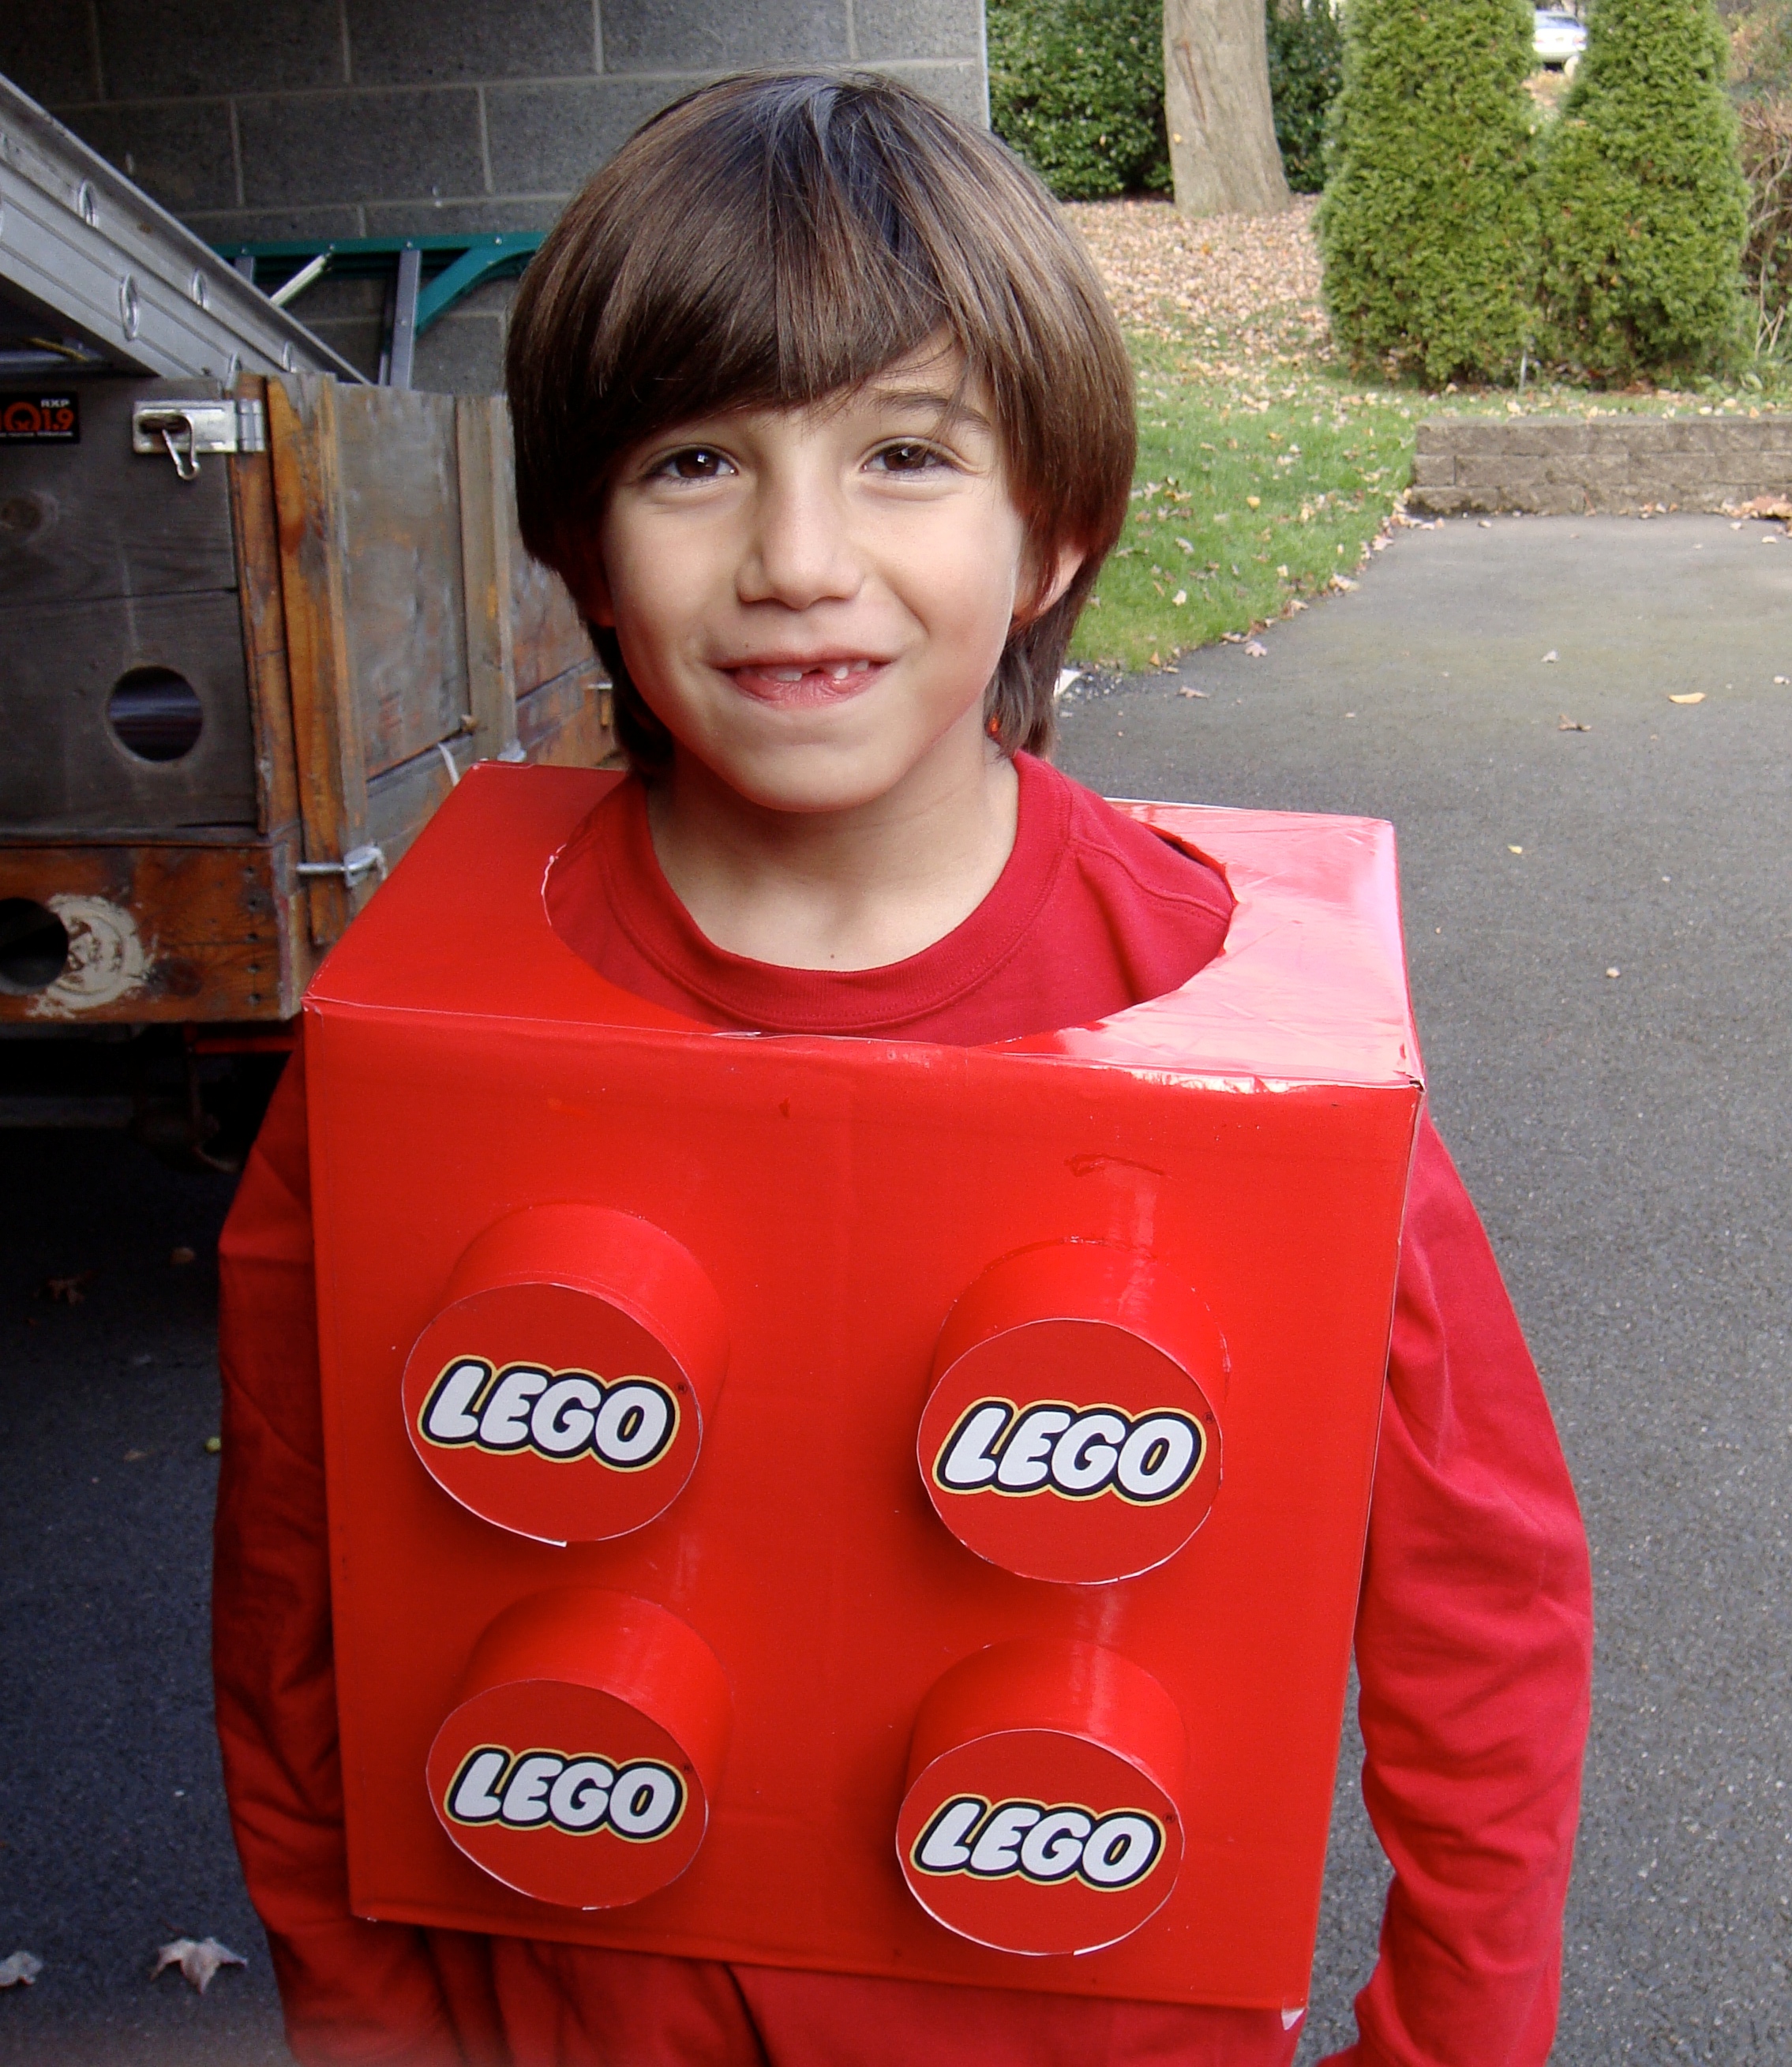 Dylan as a Lego.  